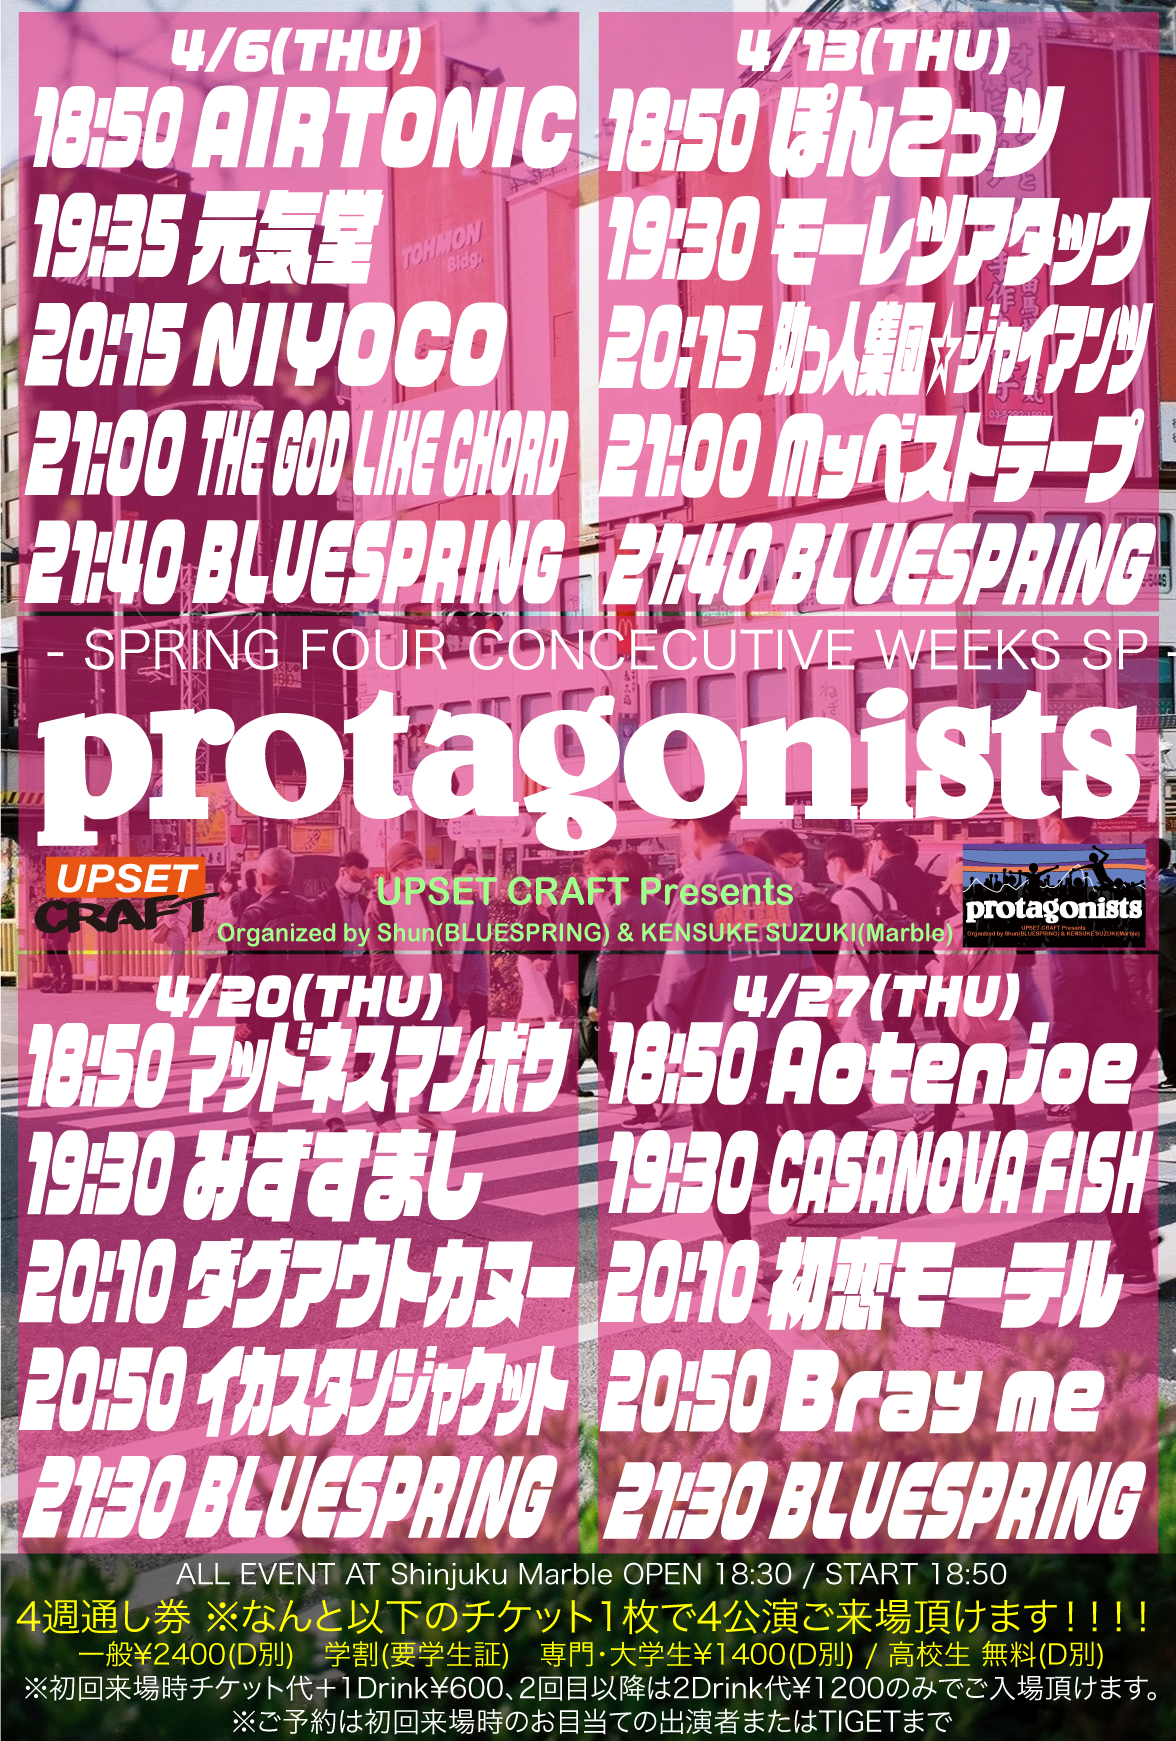 UPSET CRAFT presents「protagonists」-SPRING FOUR CONCECUTIVE WEEKS SP –